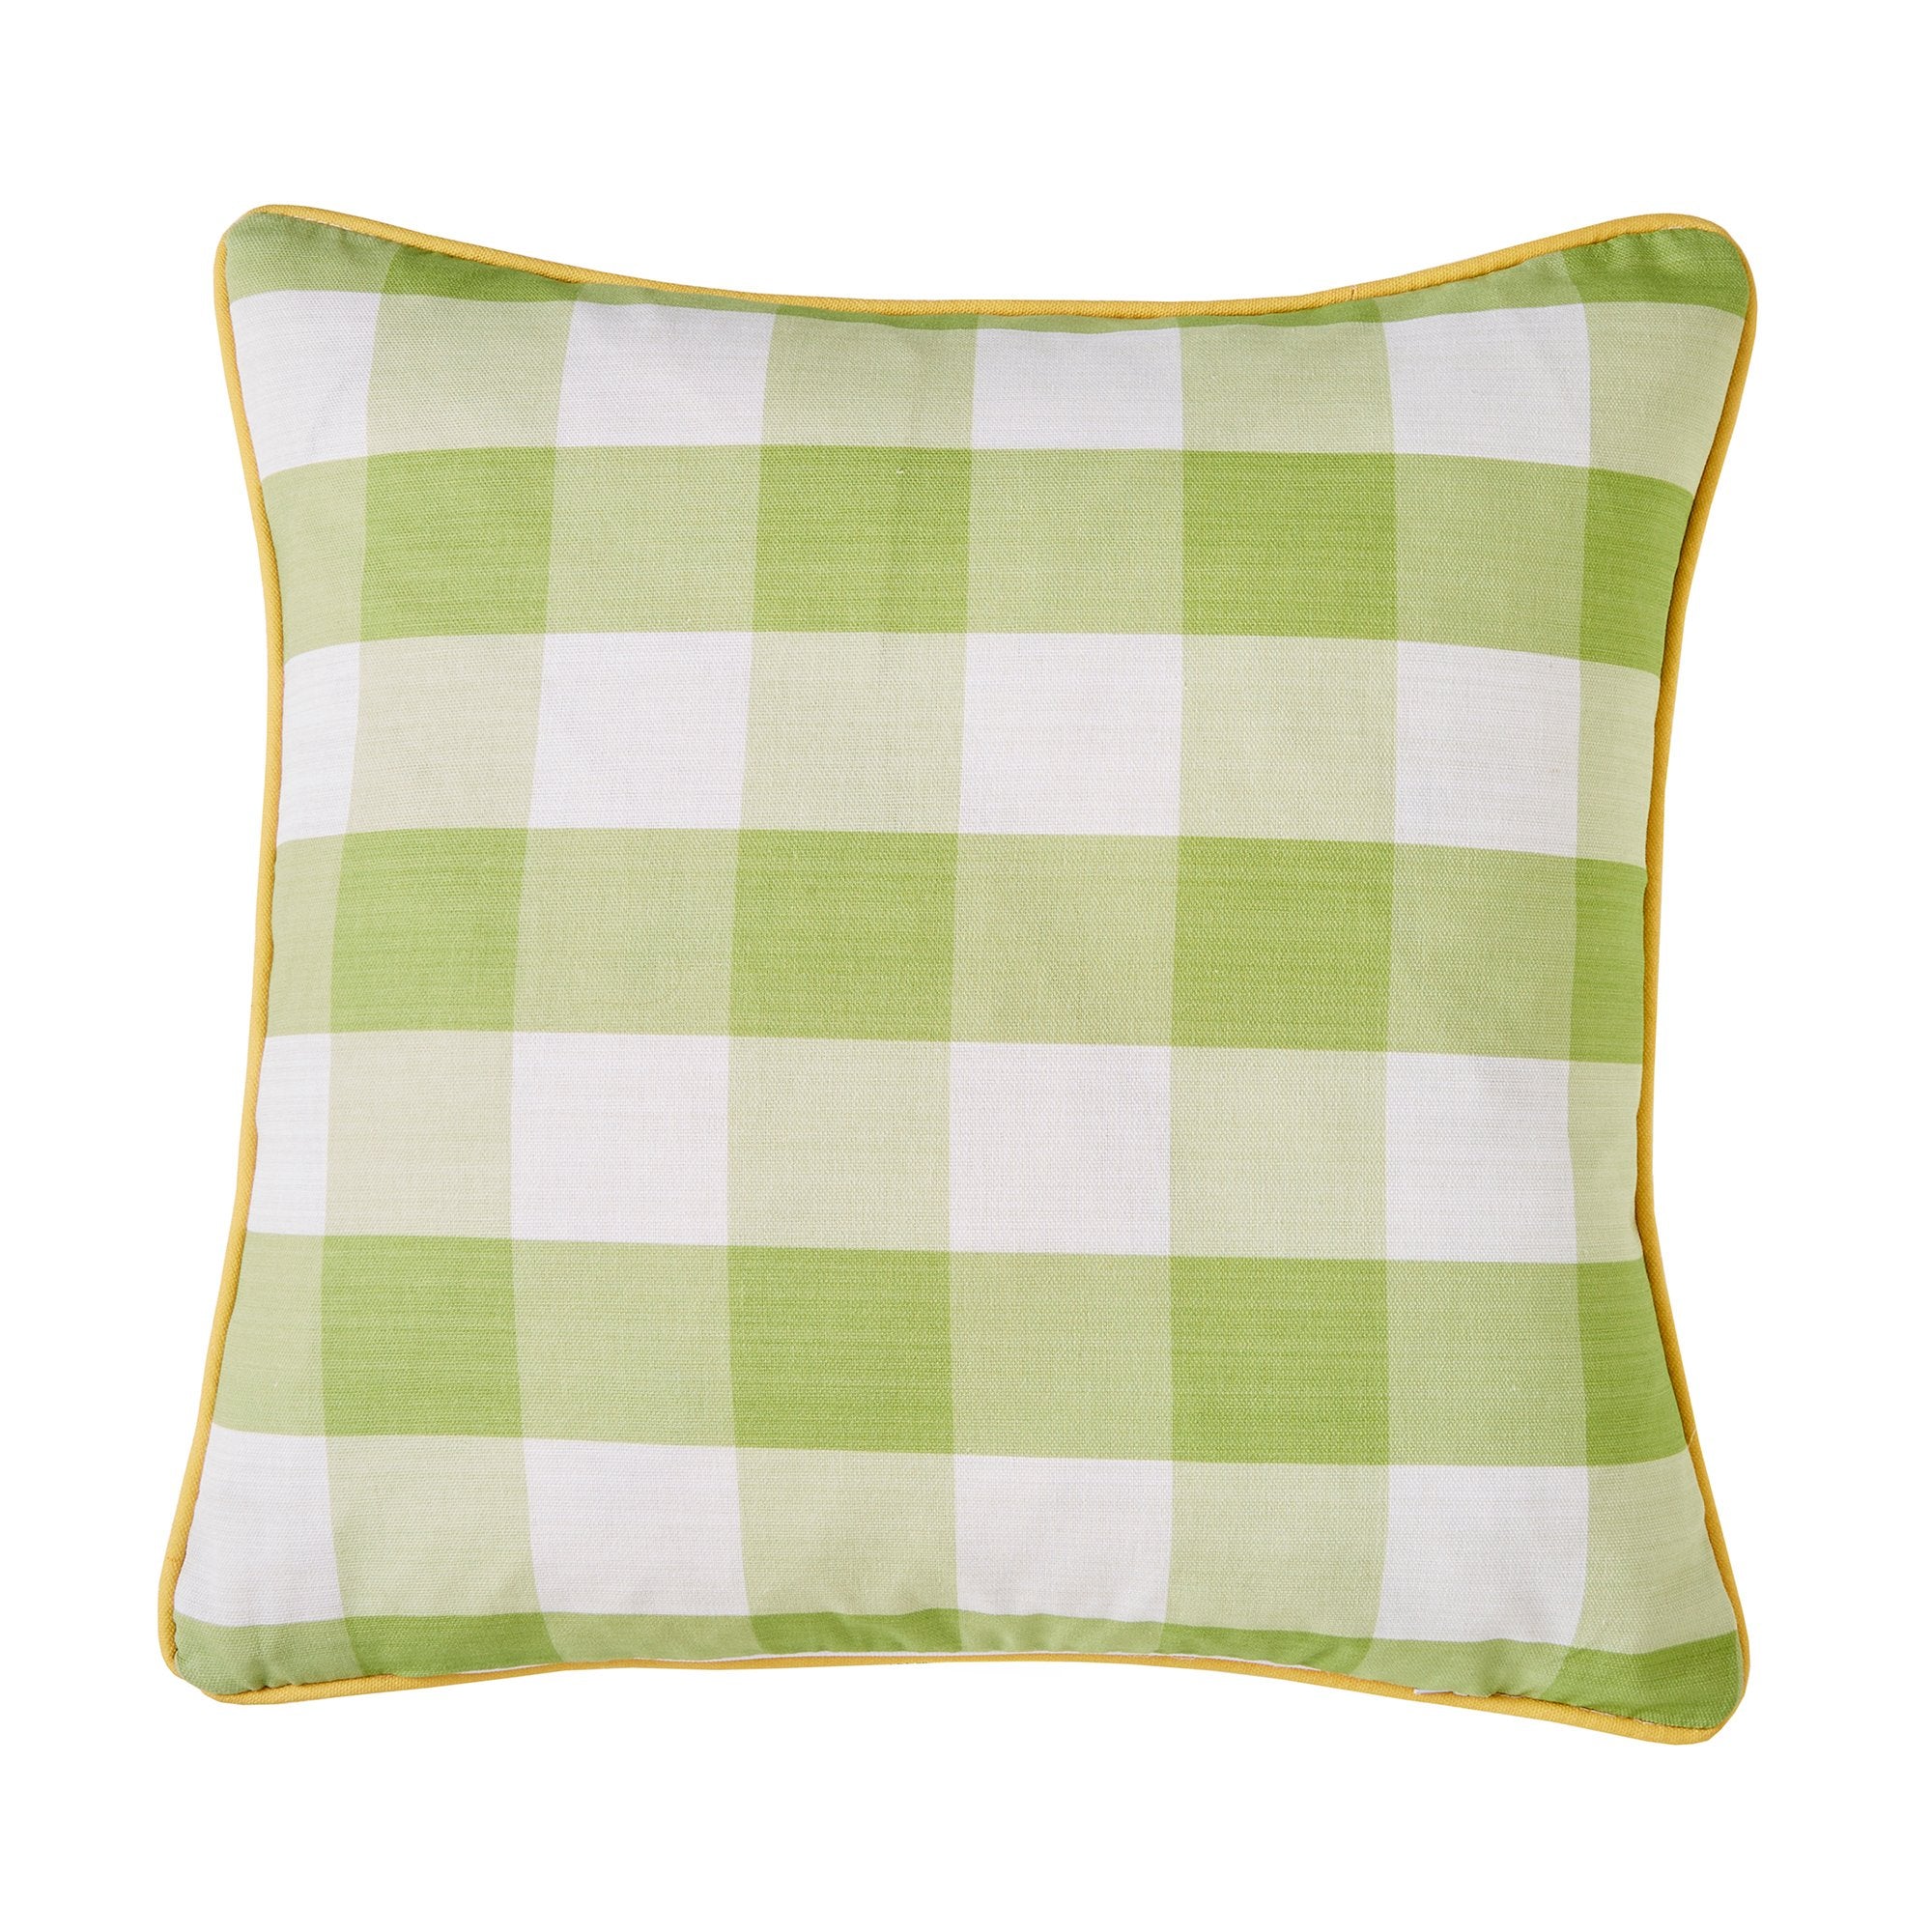 Cushion Buzzy Bee Outdoor by Fusion in Ochre